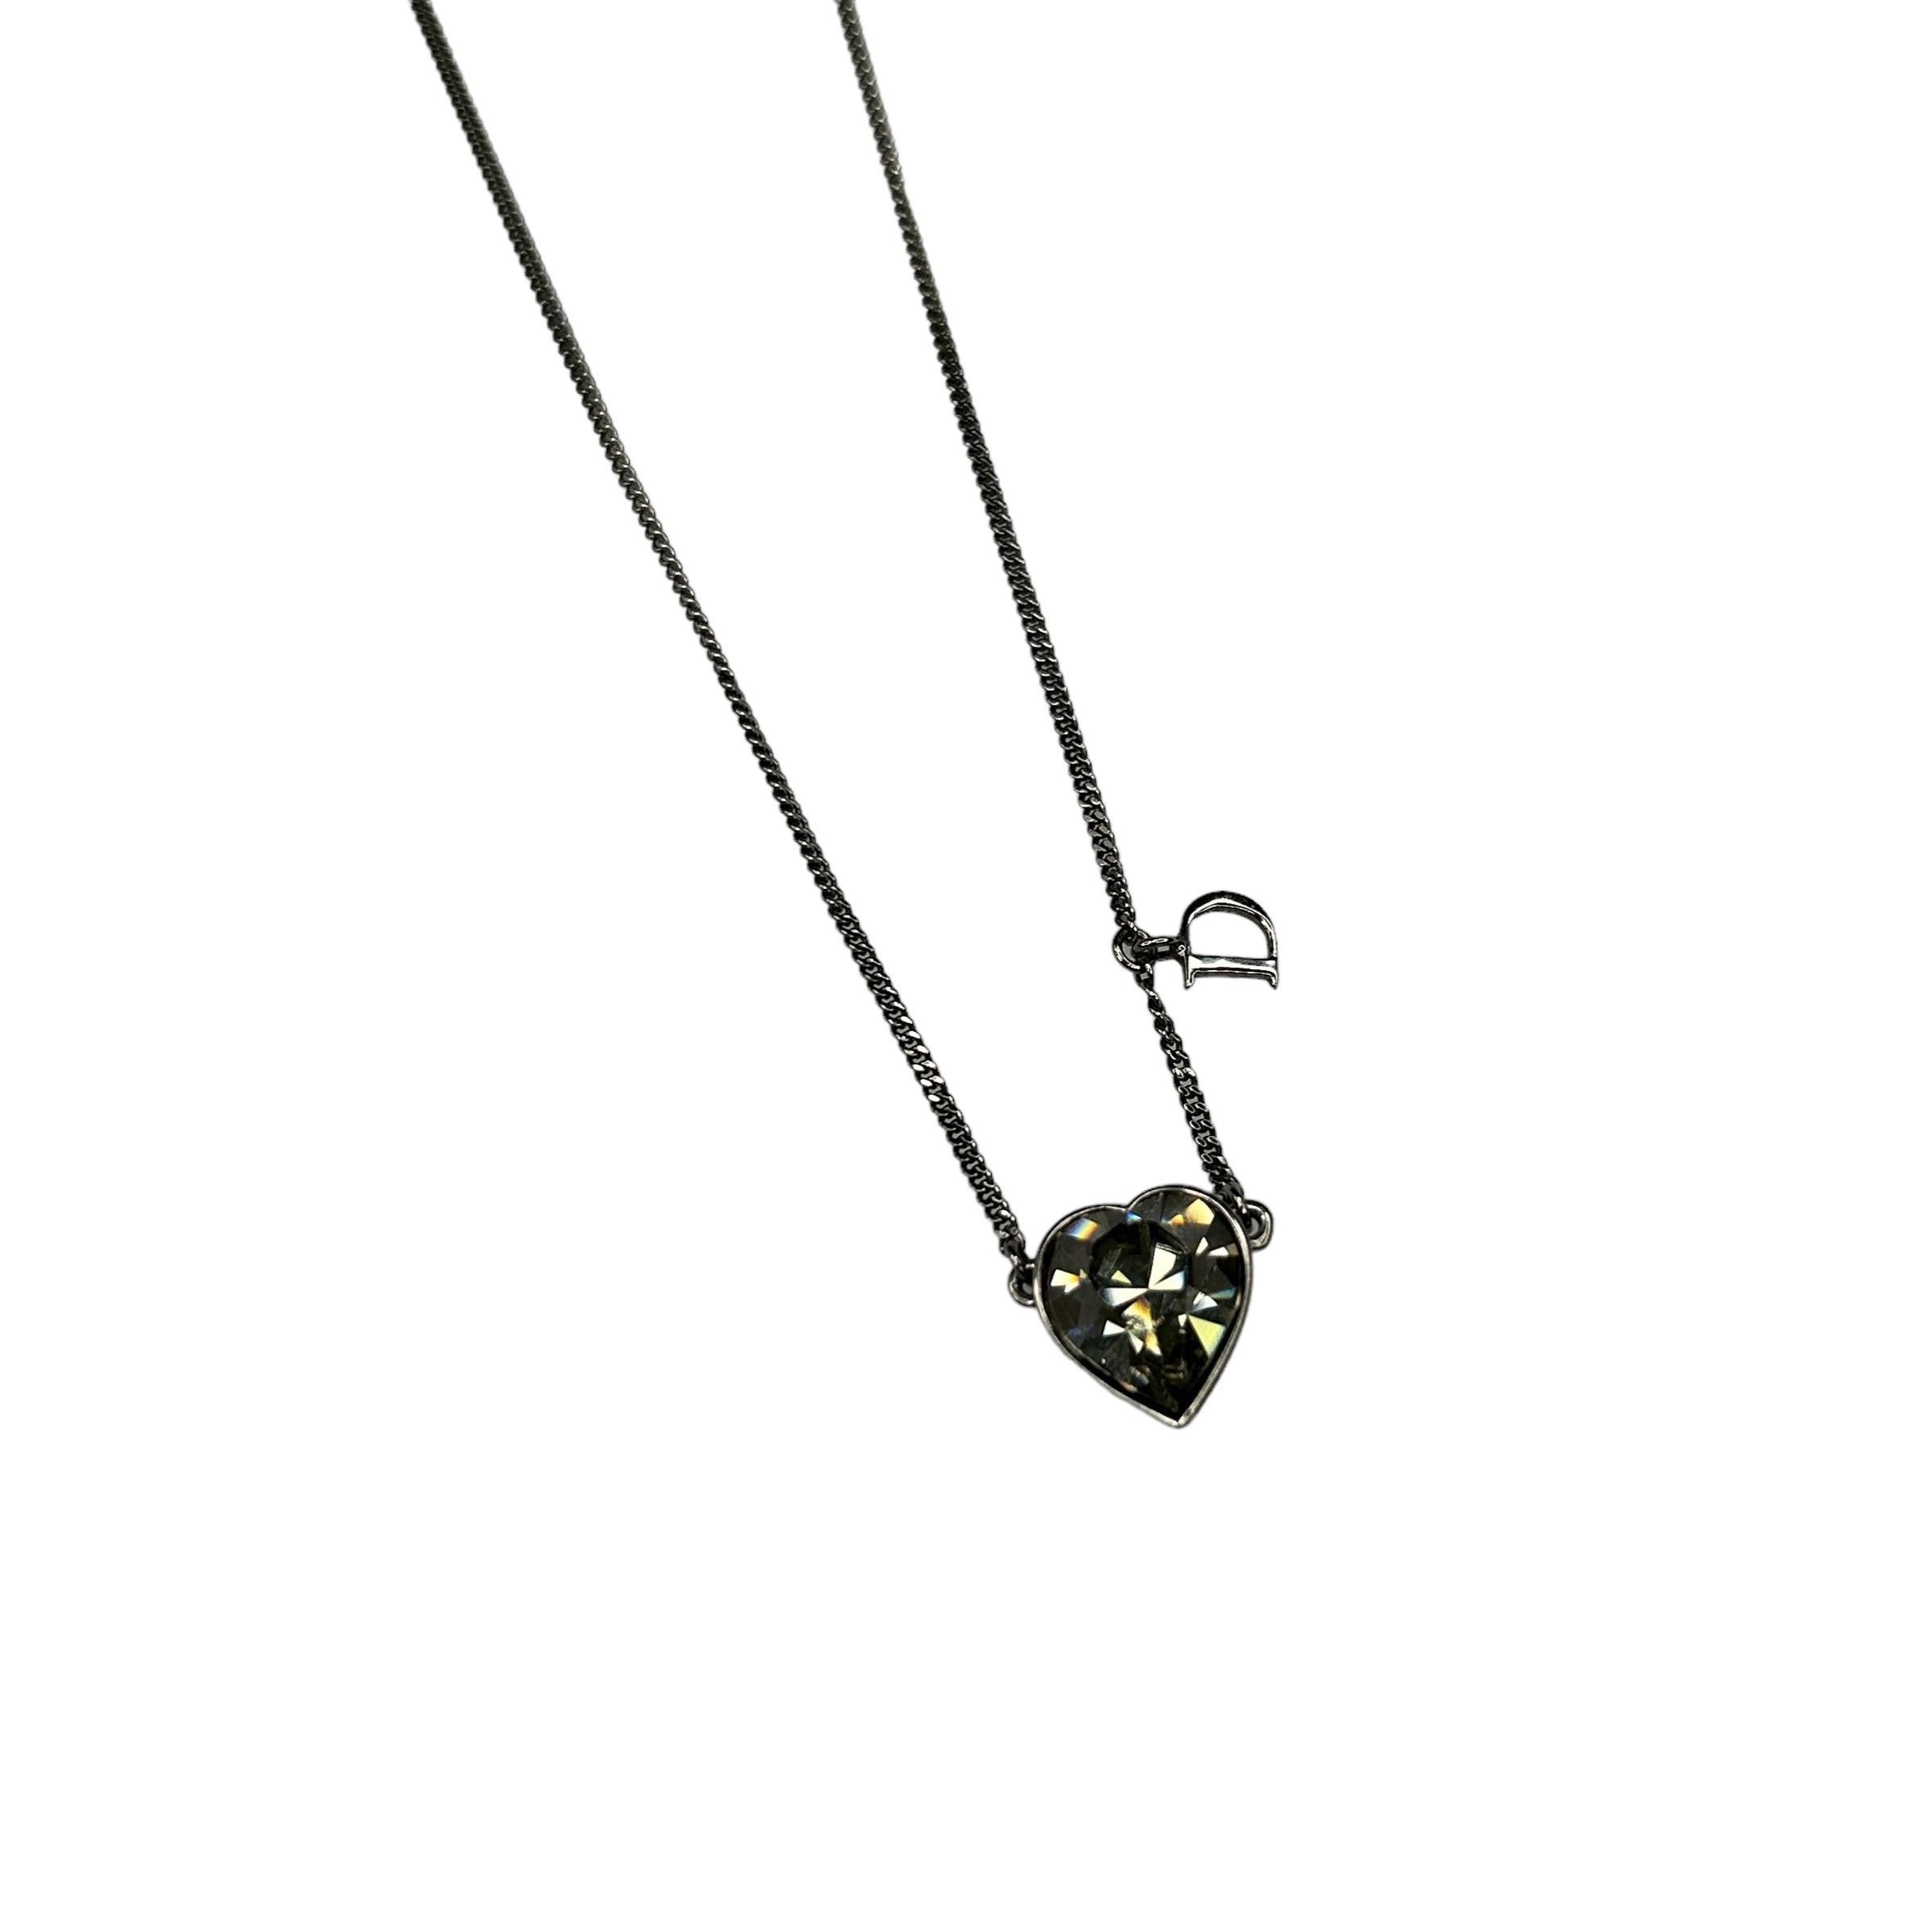 DIOR BLACK SILVER HEART STONE NECKLACE - SILVER PLATED HF4